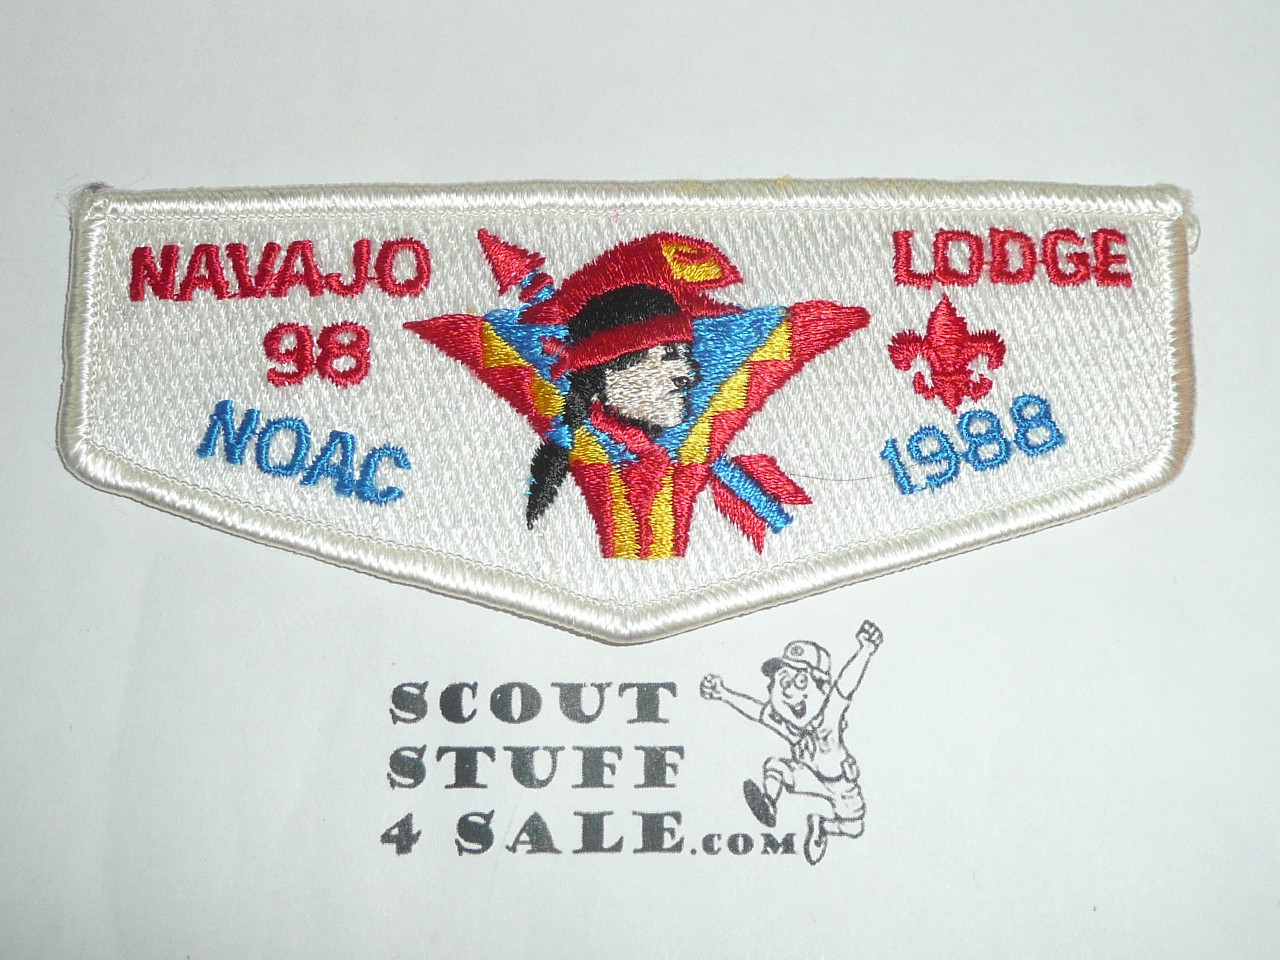 Order of the Arrow Lodge #98 Navajo s21 1988 NOAC Flap Patch